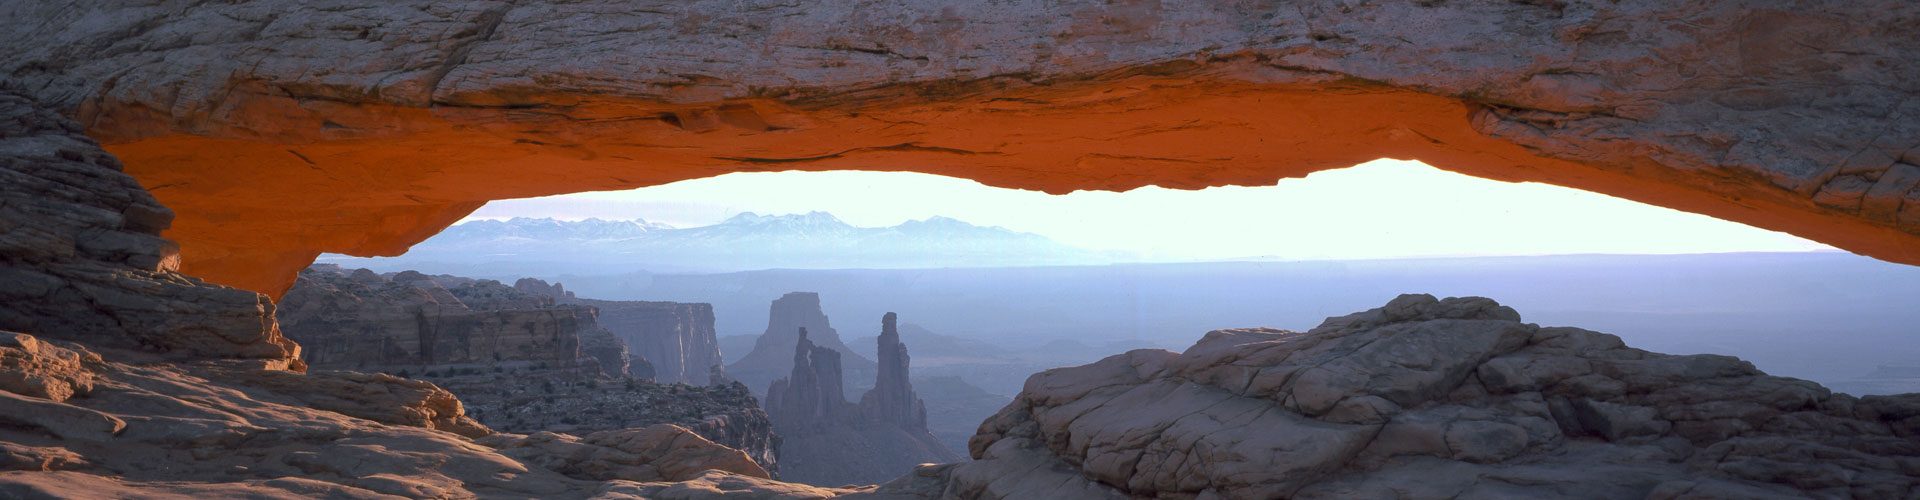 Mesa Arch, Island in the Sky, Canyonlands National Park